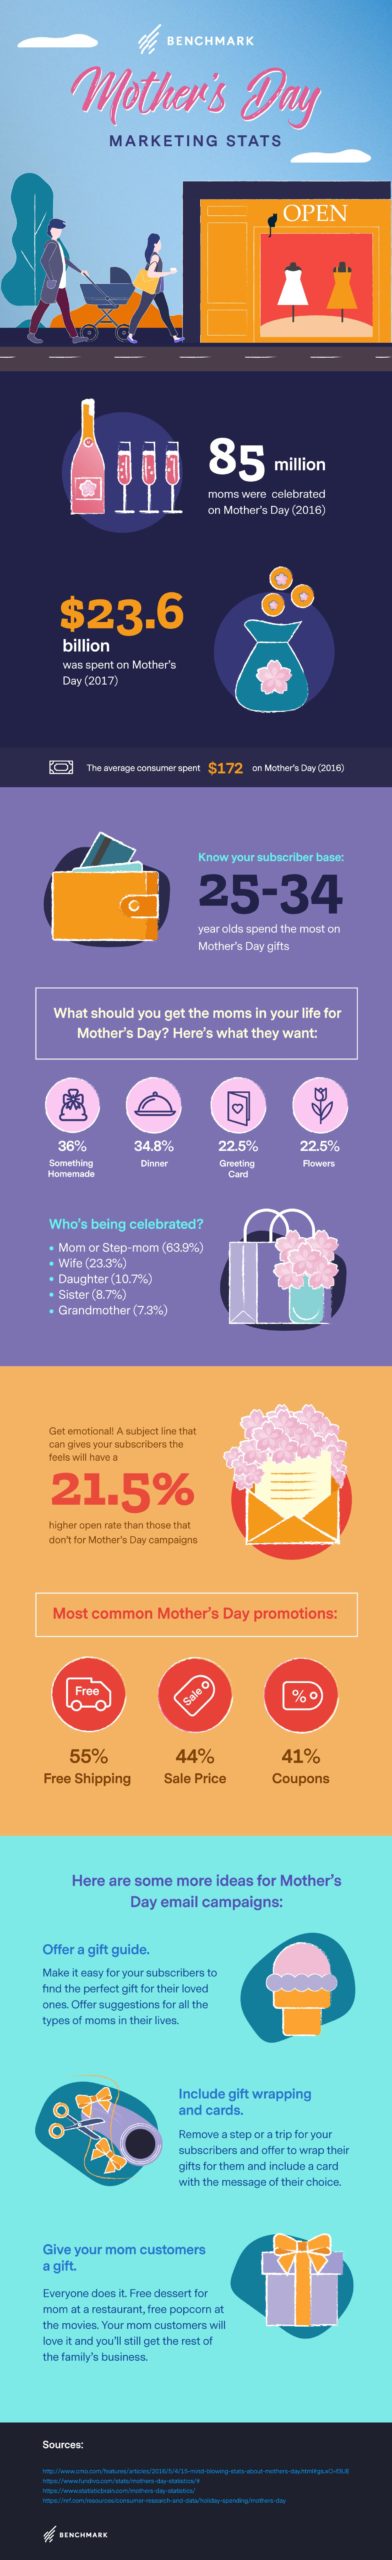 Mother's Day Marketing infographic